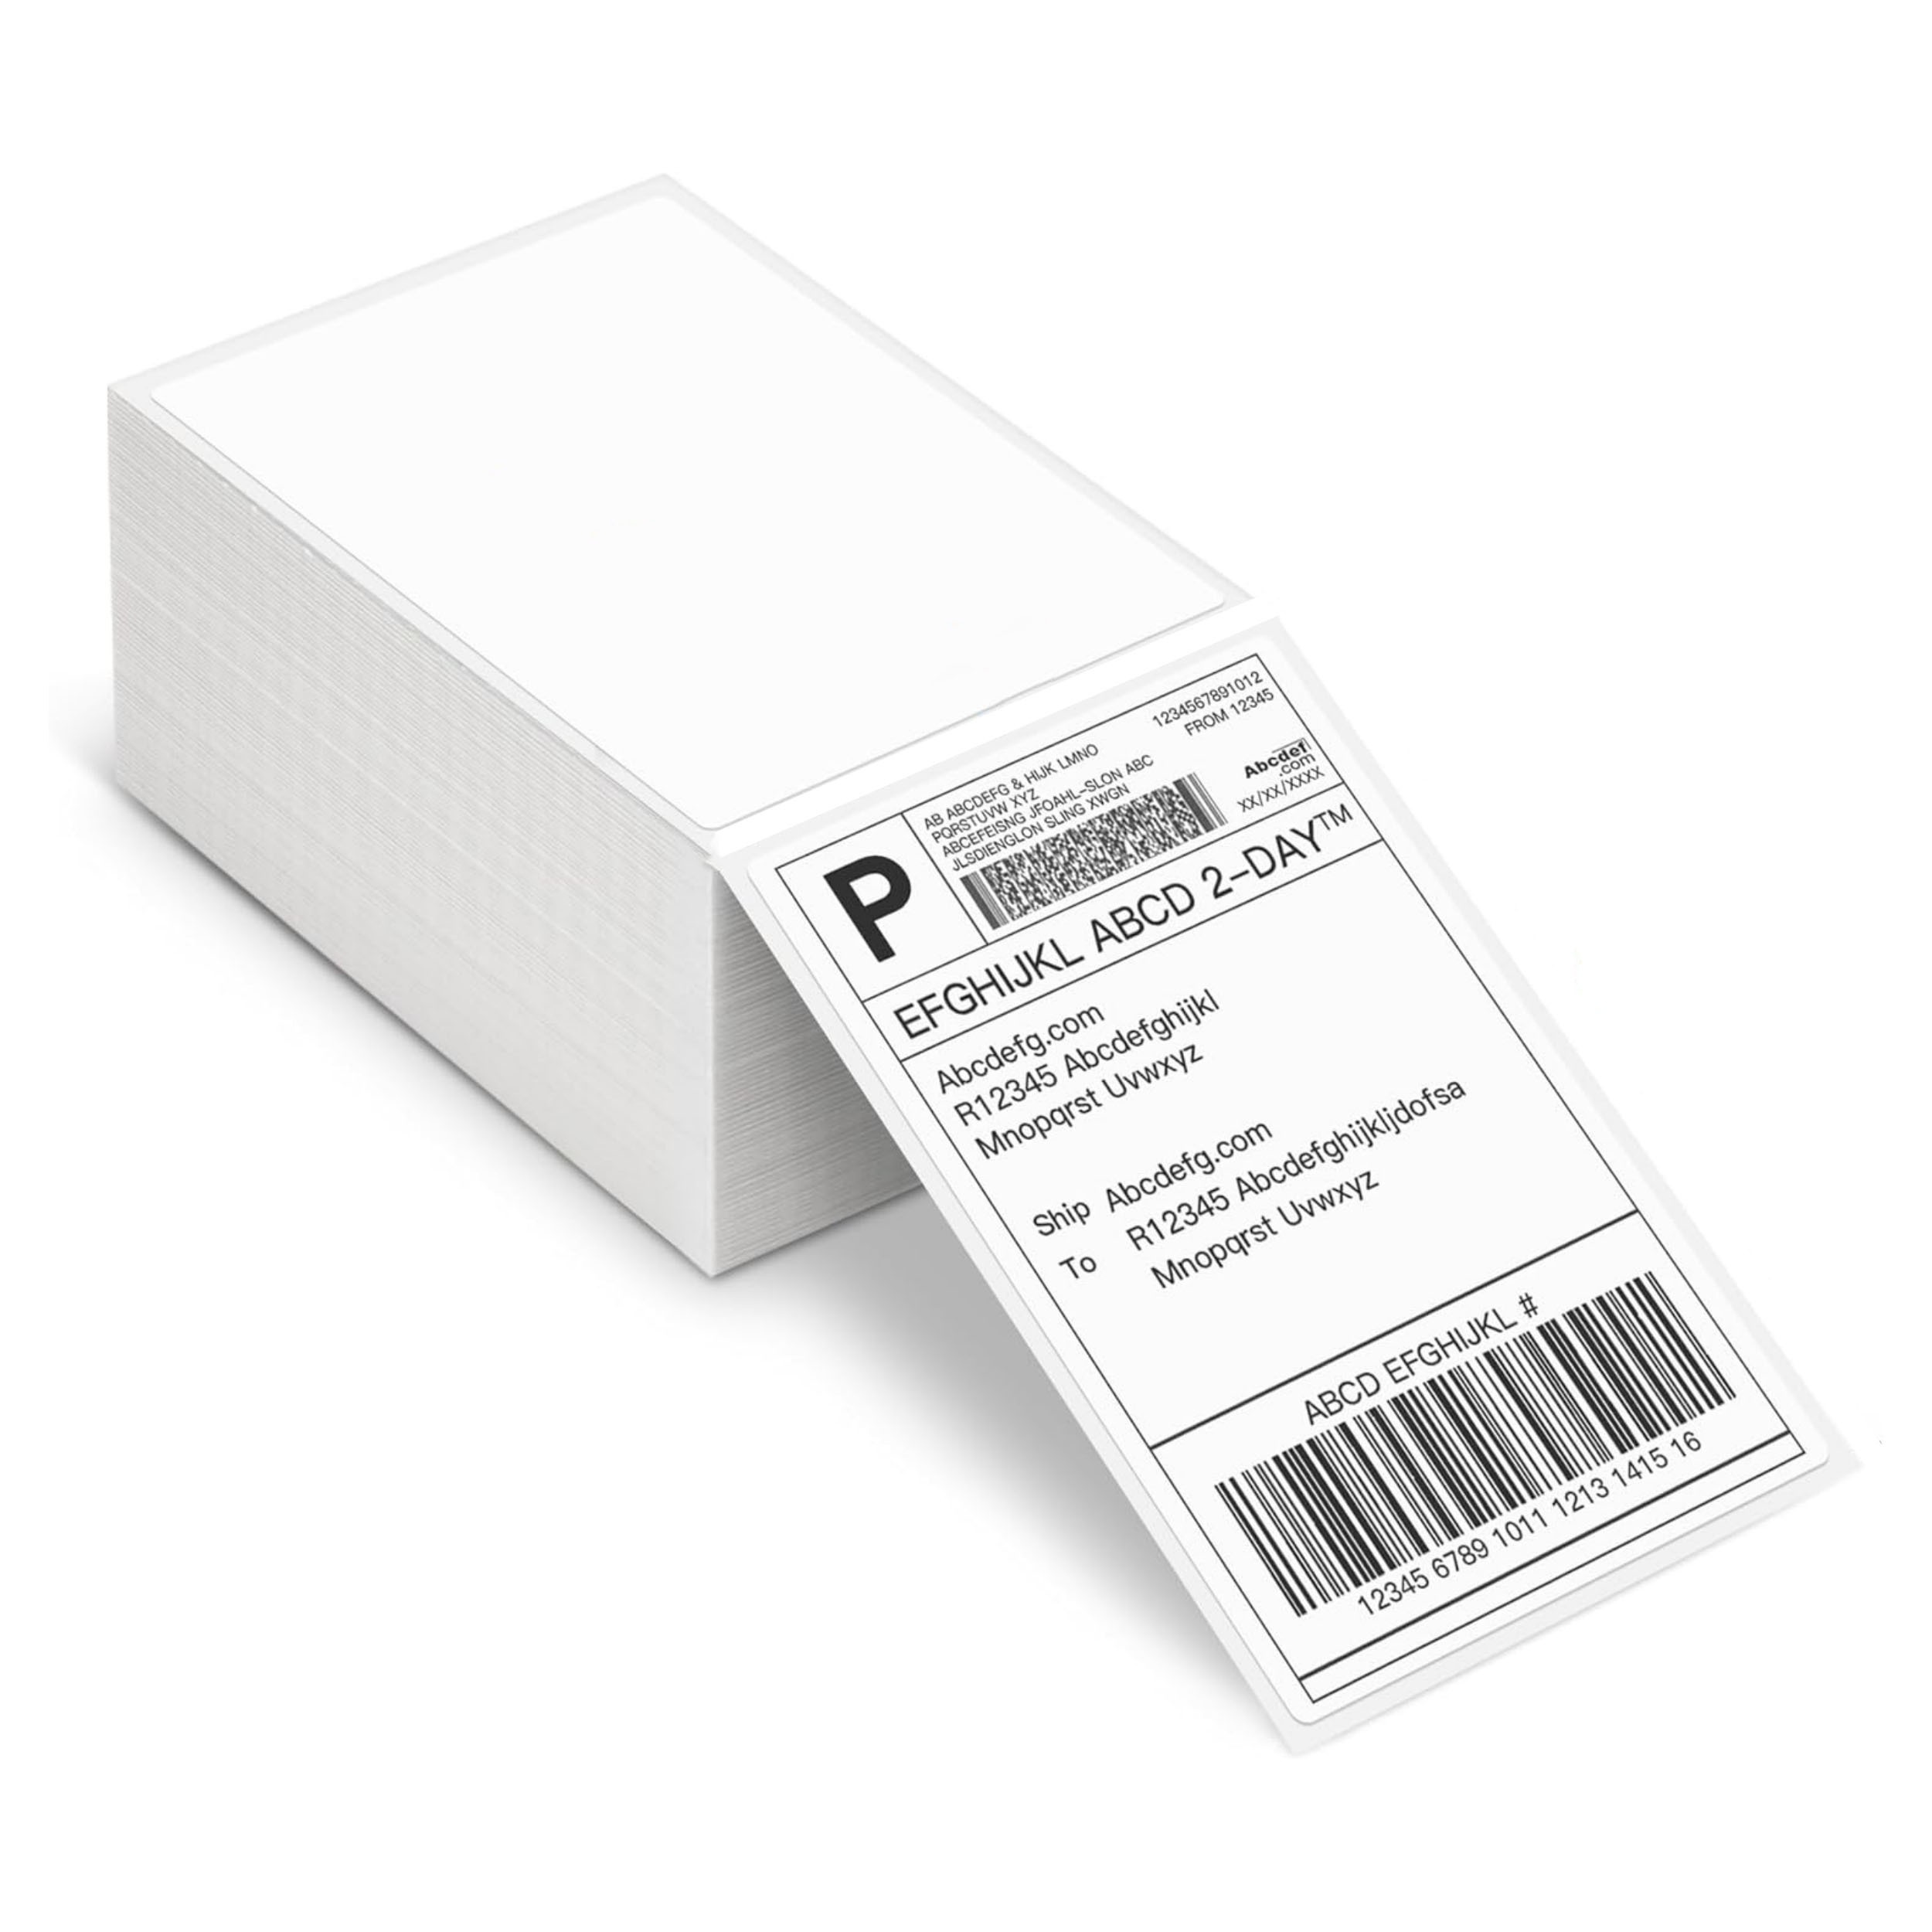 

4" X 6" Direct Thermal Labels, 150 Labels, Fanfold Shipping Package Labels, Perforated White Mailing Labels, Commercial Grade, Permanent Adhesive, Compatible With Most Thermal Printers